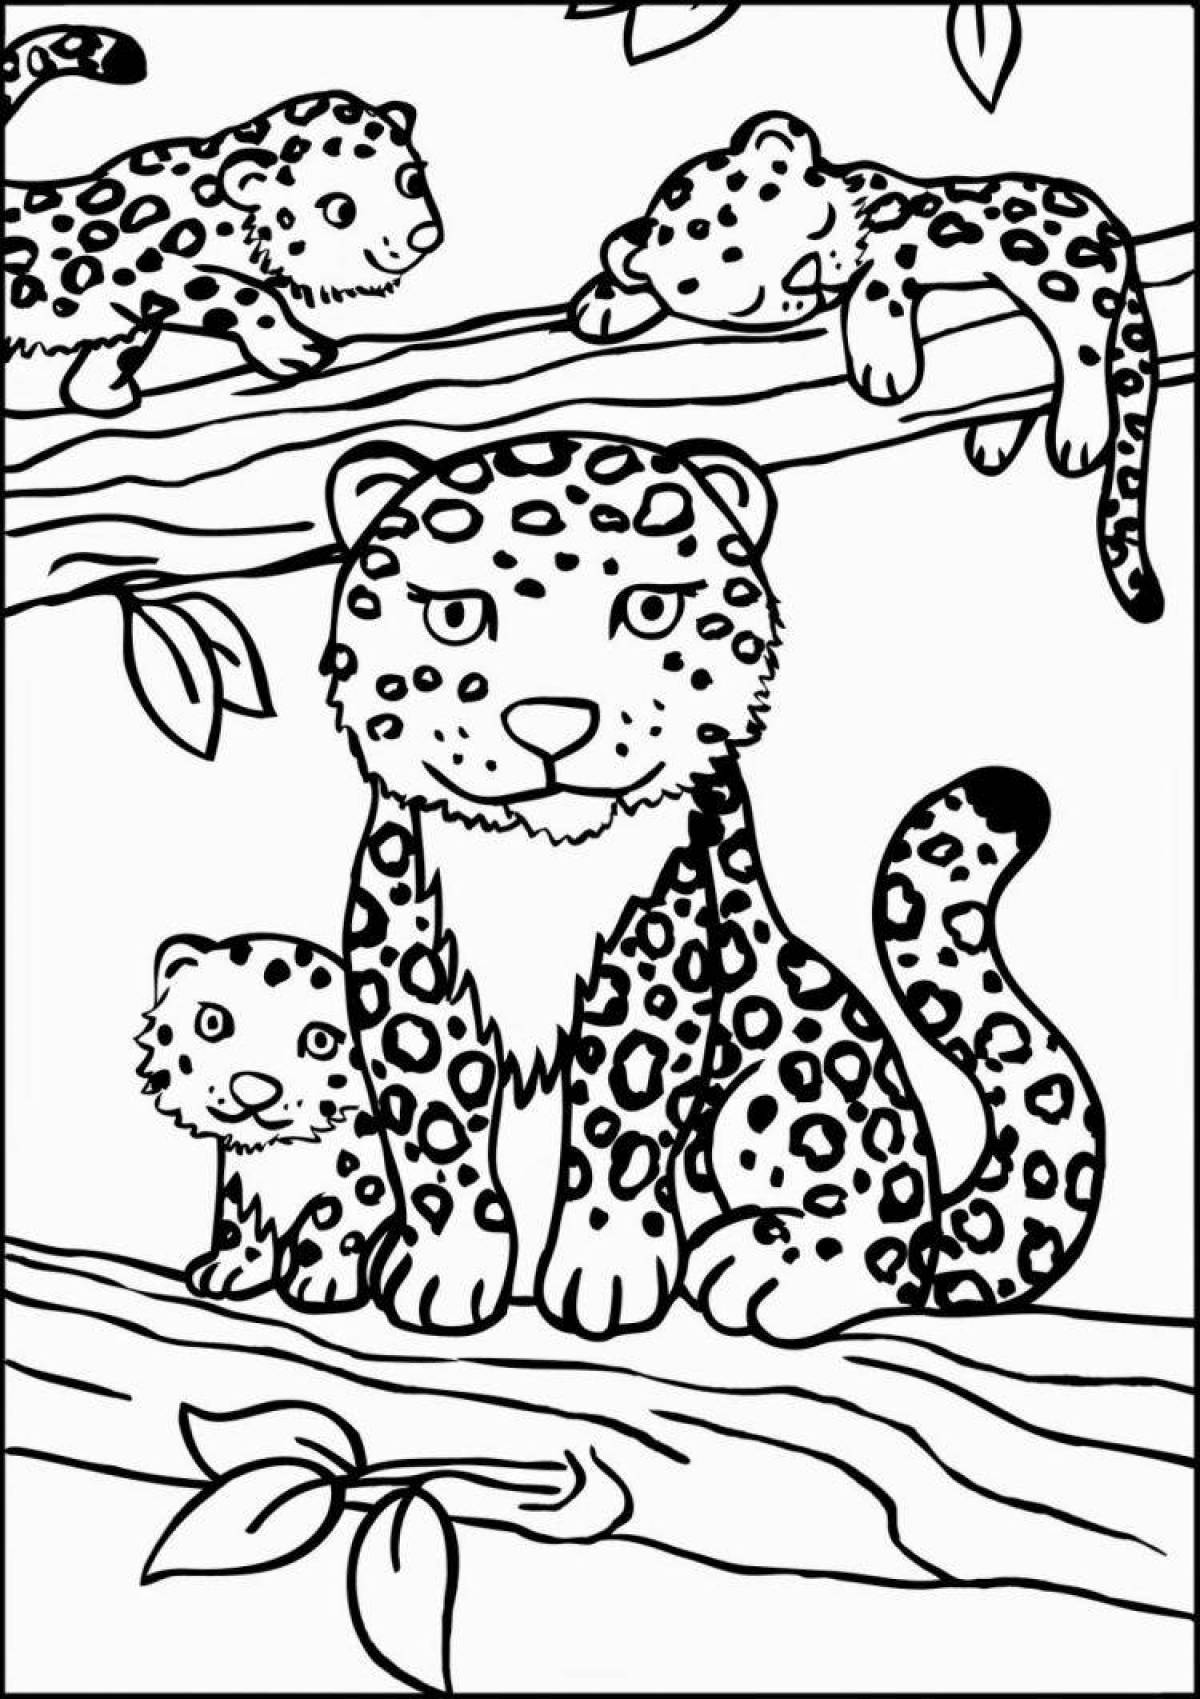 Coloring book amazing leopard